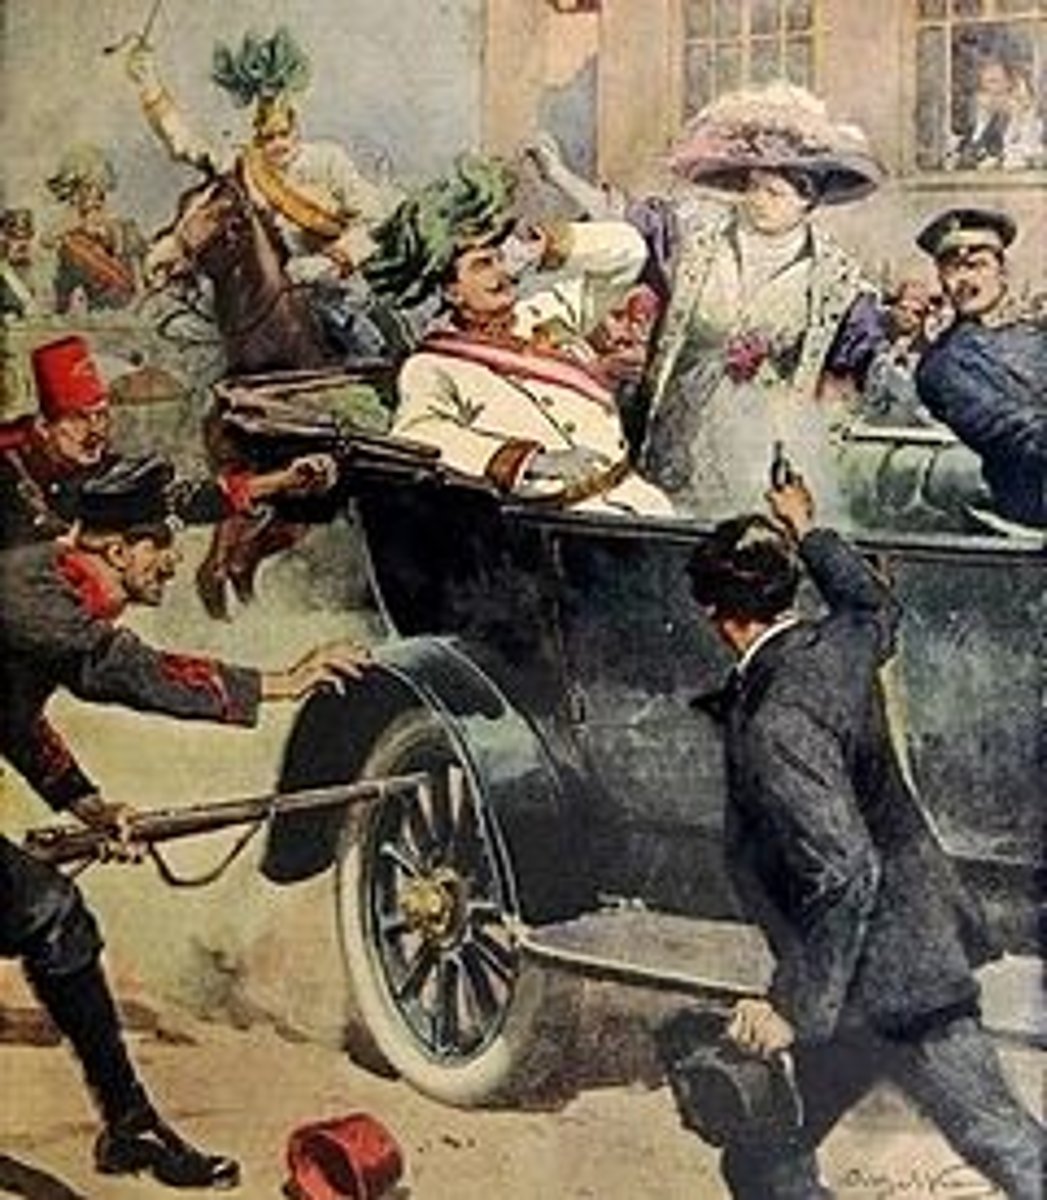 <p>This was the spark that started World War I. Archduke Ferdinand, the Austrian crown prince, was murdered on June 28, 1914, by a Serbian nationalist while visiting Sarajevo, Bosnia. Germany urged Austria-Hungary to fight and they went to war against Serbia; all of this due to Serbia wanting to expand</p>